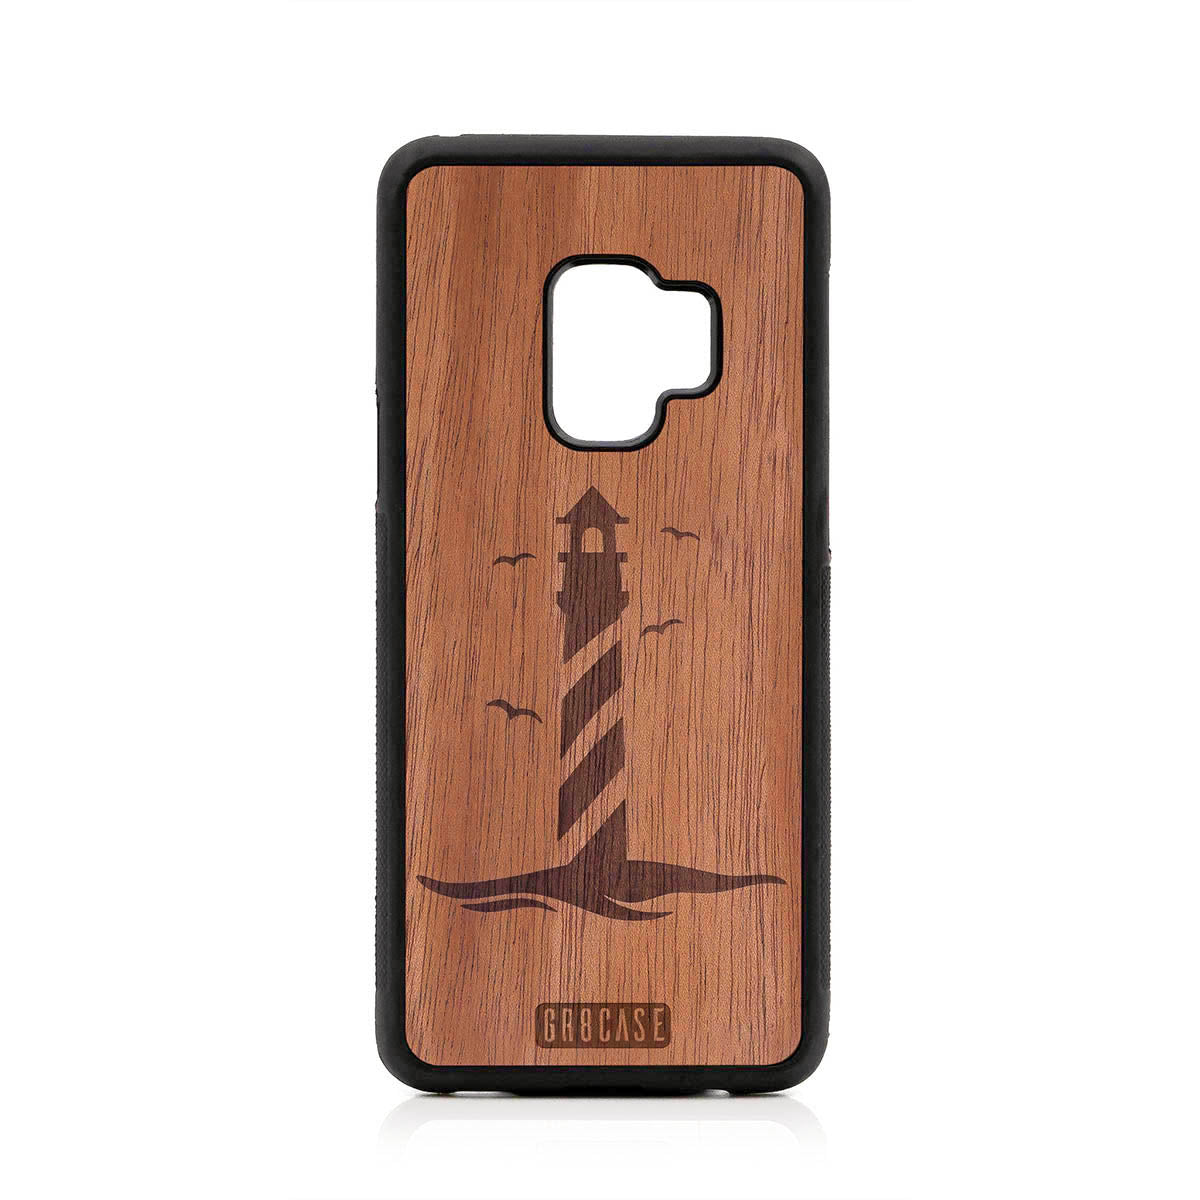 Lighthouse Design Wood Case For Samsung Galaxy S9